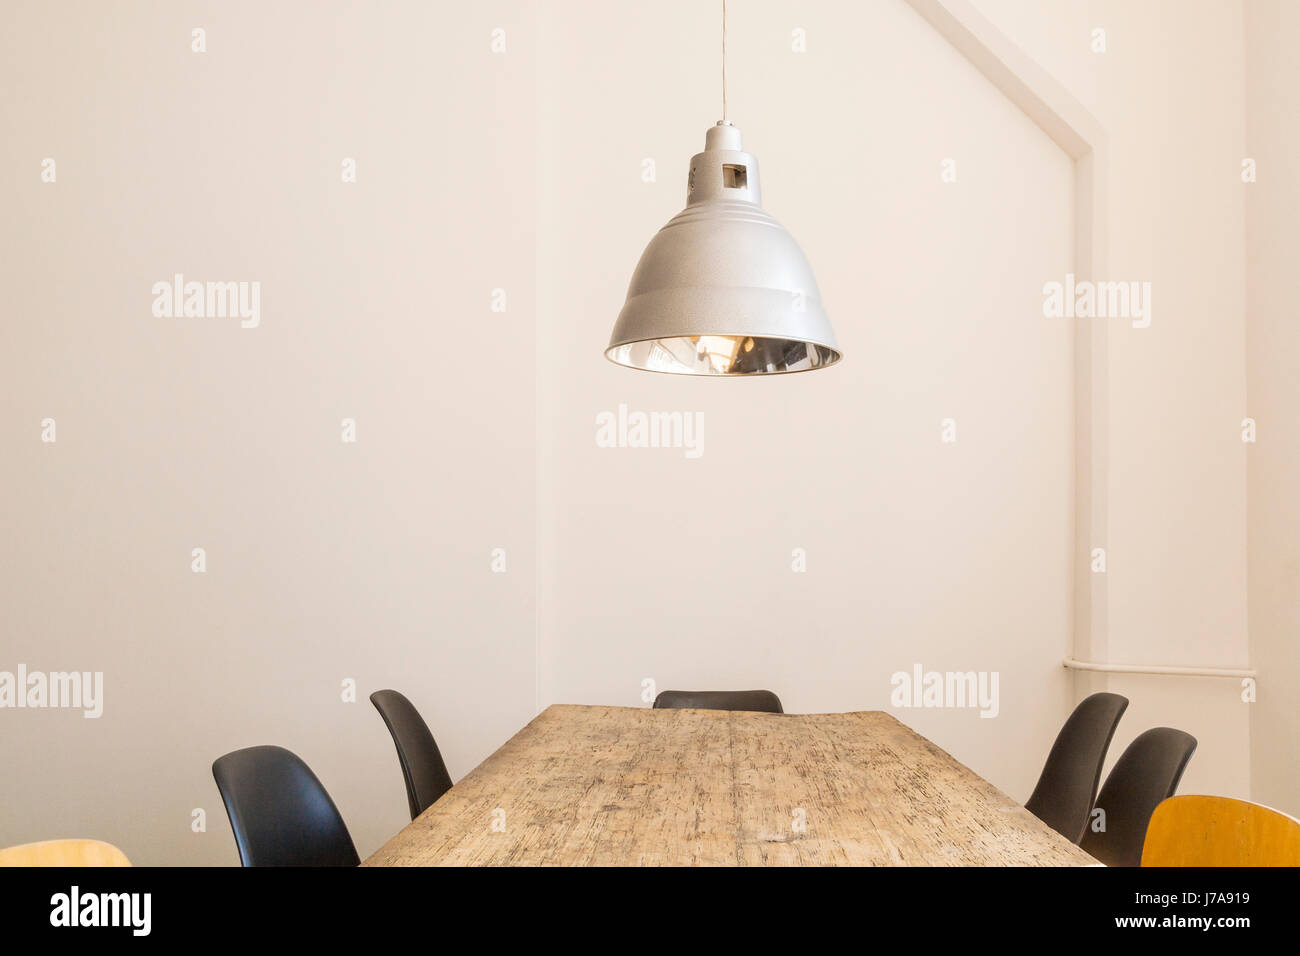 Conference table and ceiling light in a loft Stock Photo